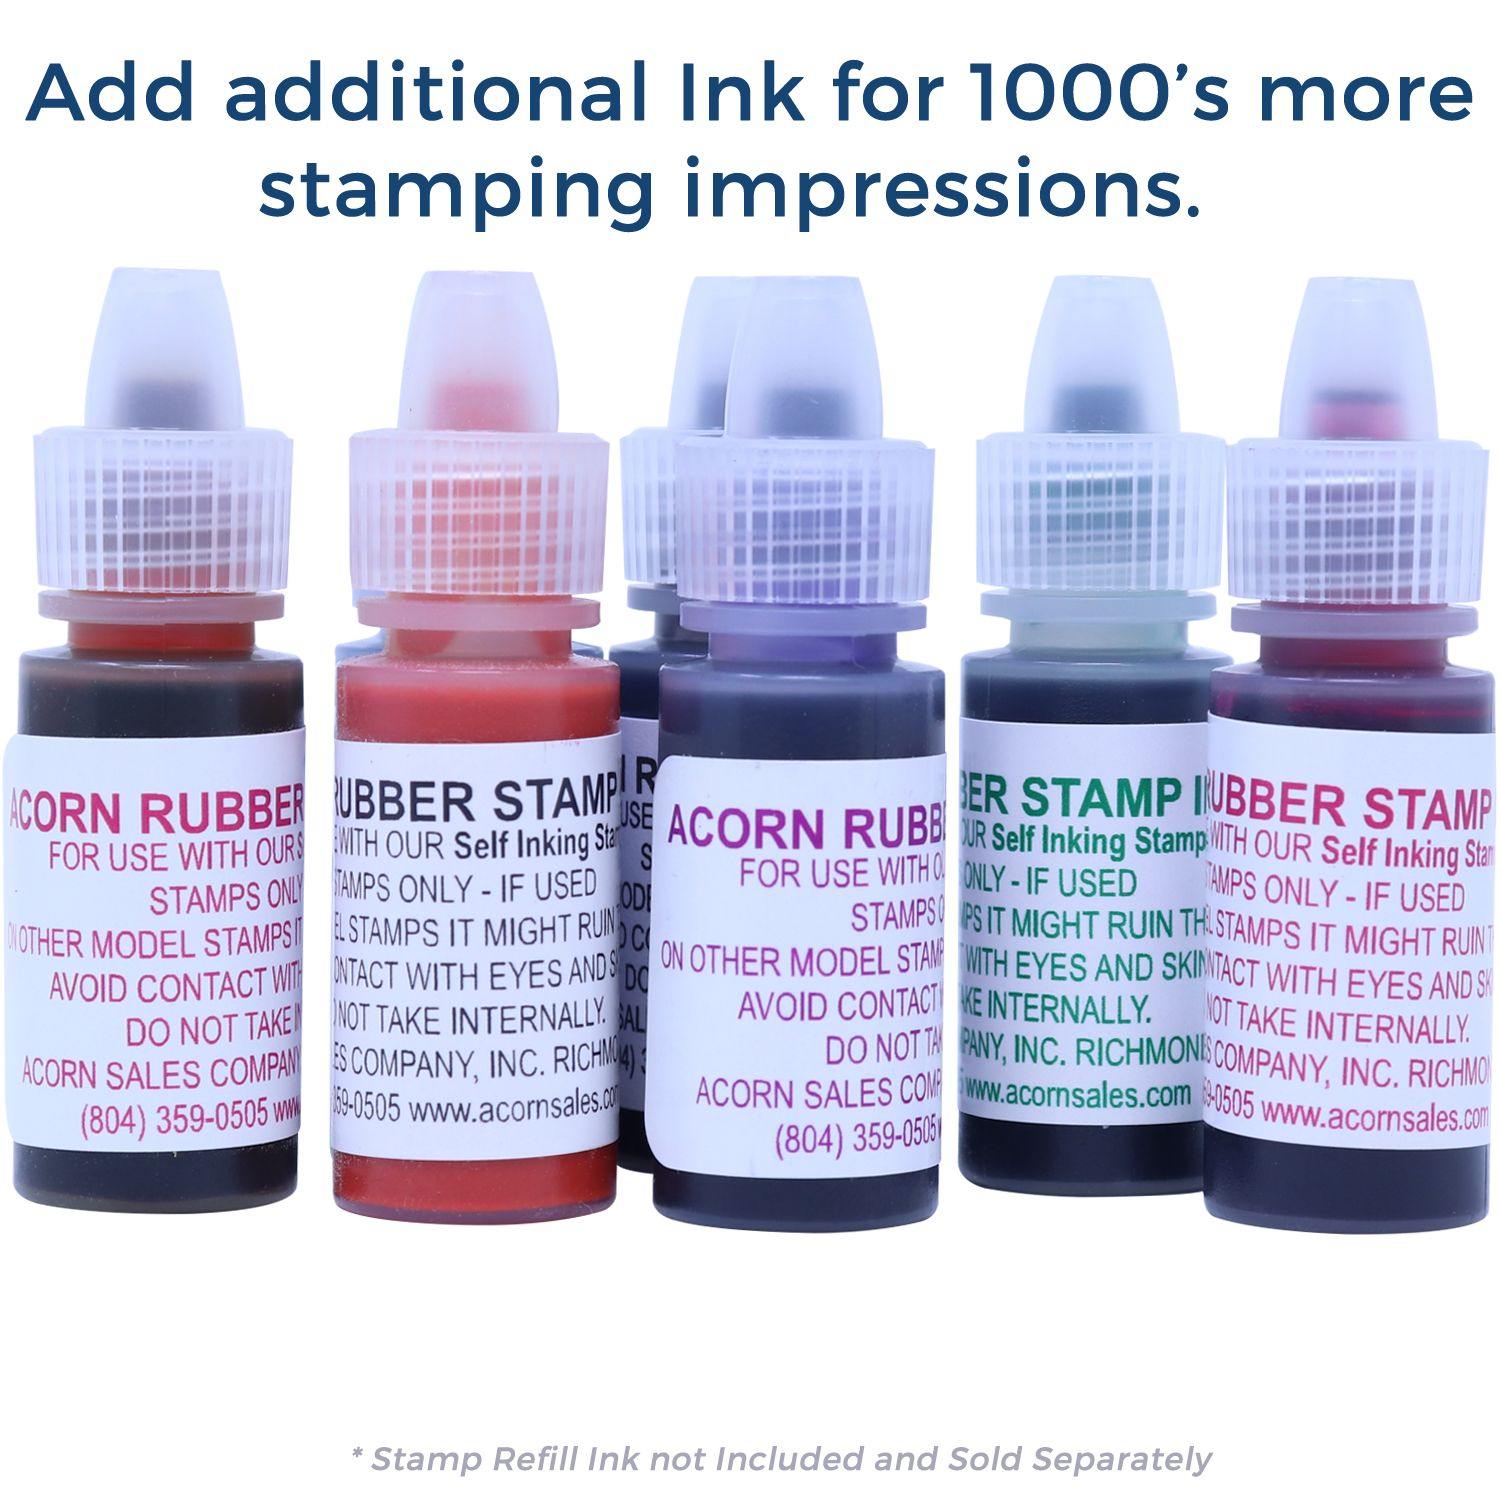 Refill Inks for Large Pre-Inked Economy Mail Stamp Available